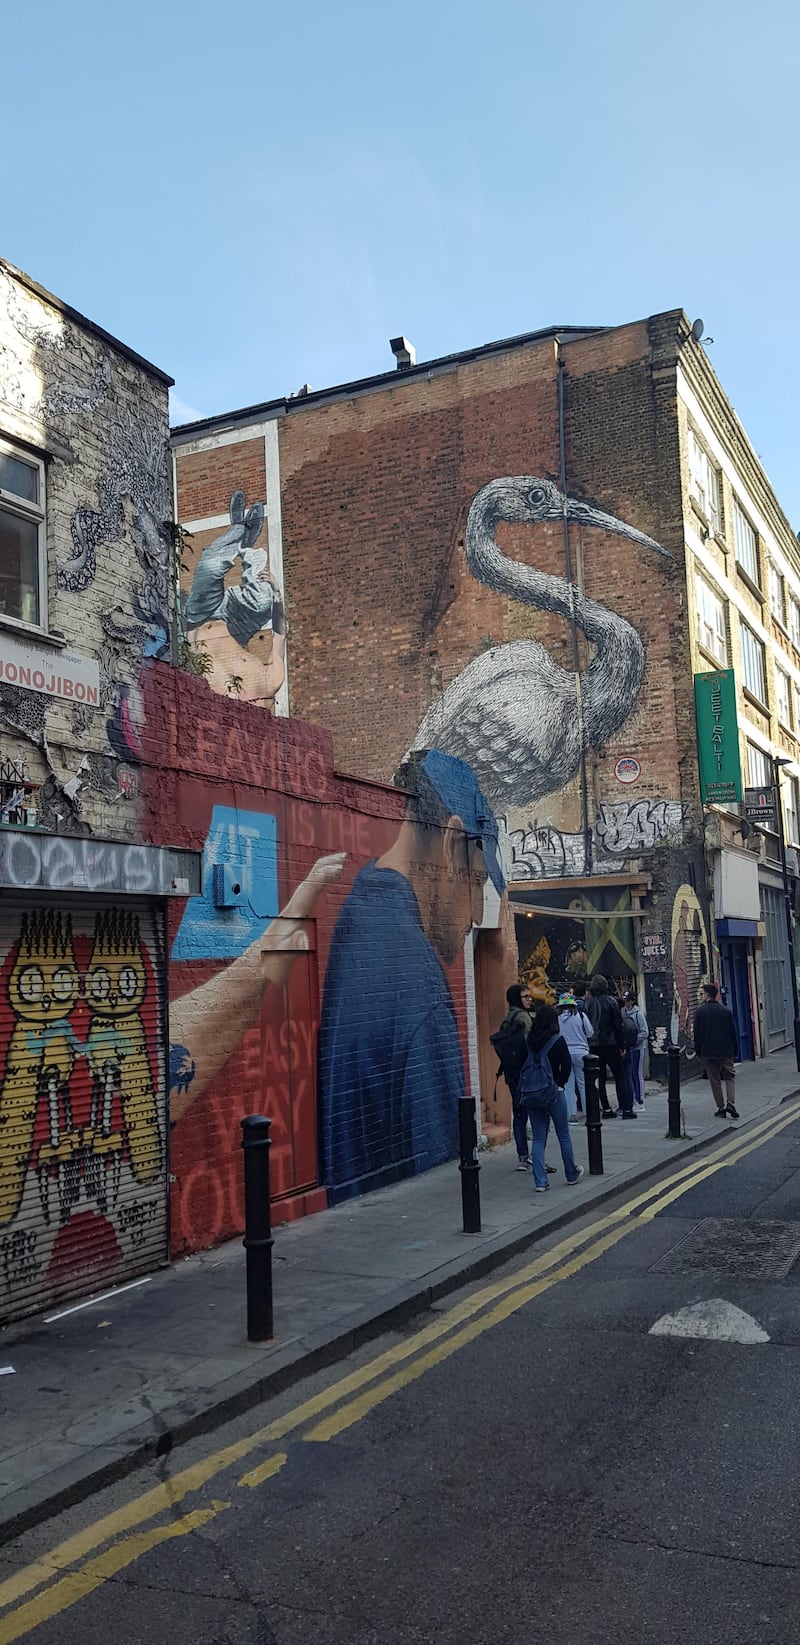 A spectacular bird painted by ROA from Belgium. Photo by Rosemary Behan